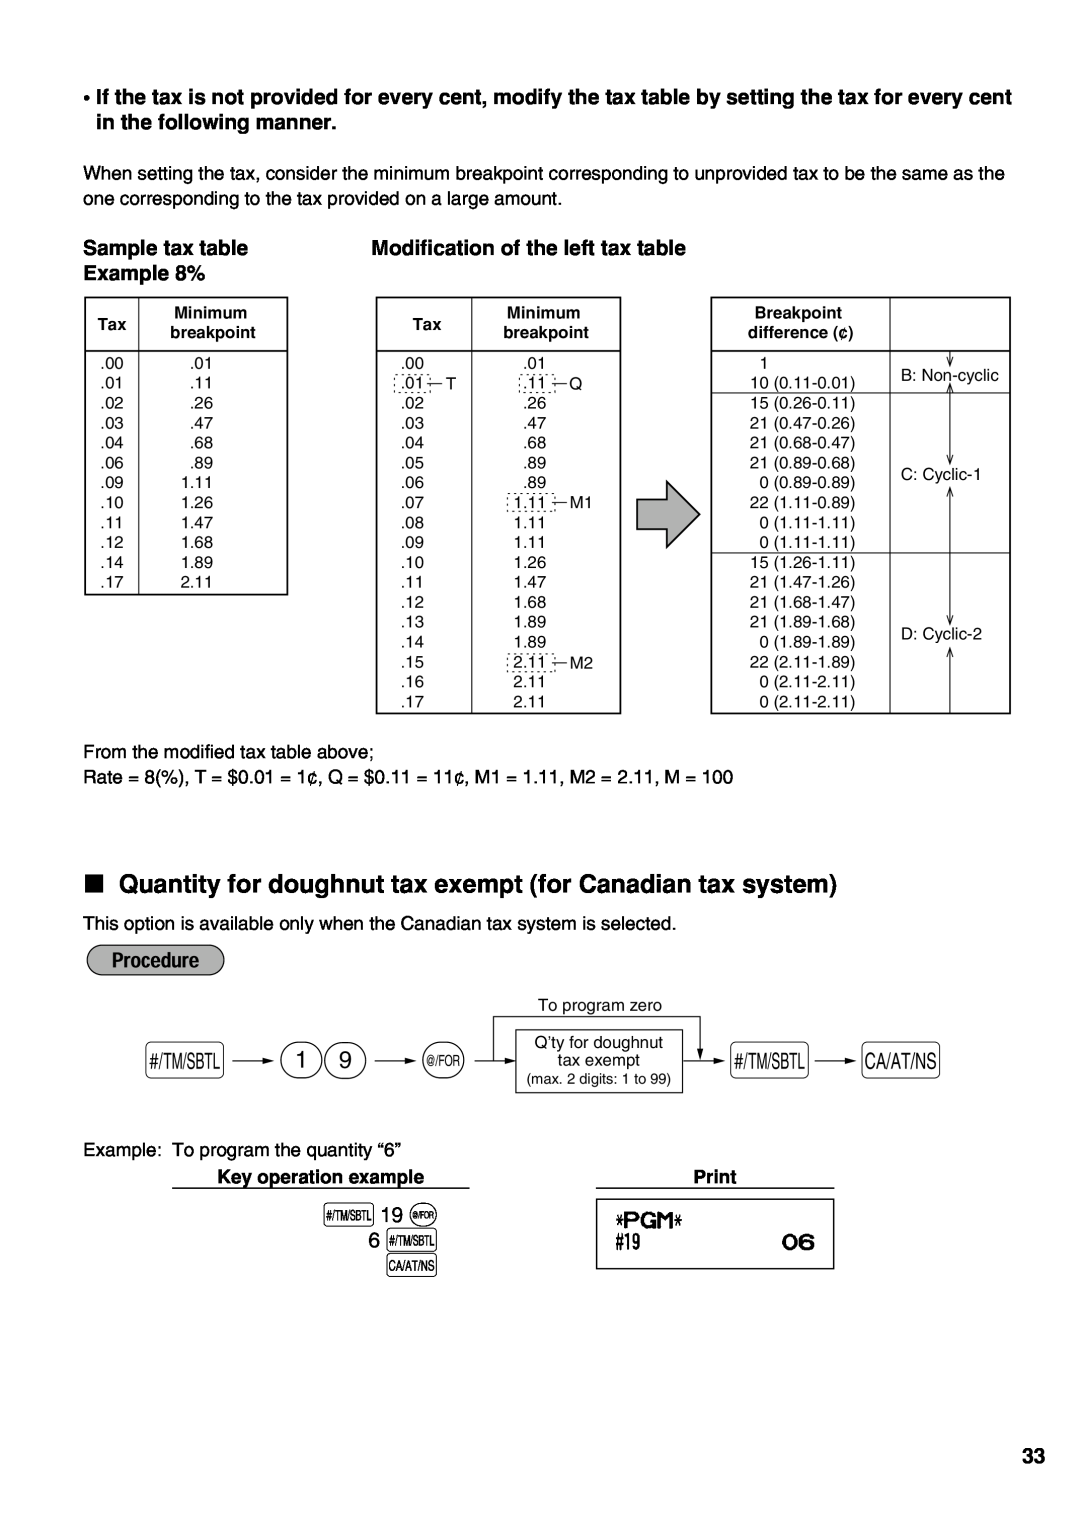 Sharp XE-A21S Quantity for doughnut tax exempt for Canadian tax system, Example 8%, s 19 @ 6 s, Sample tax table, Print 